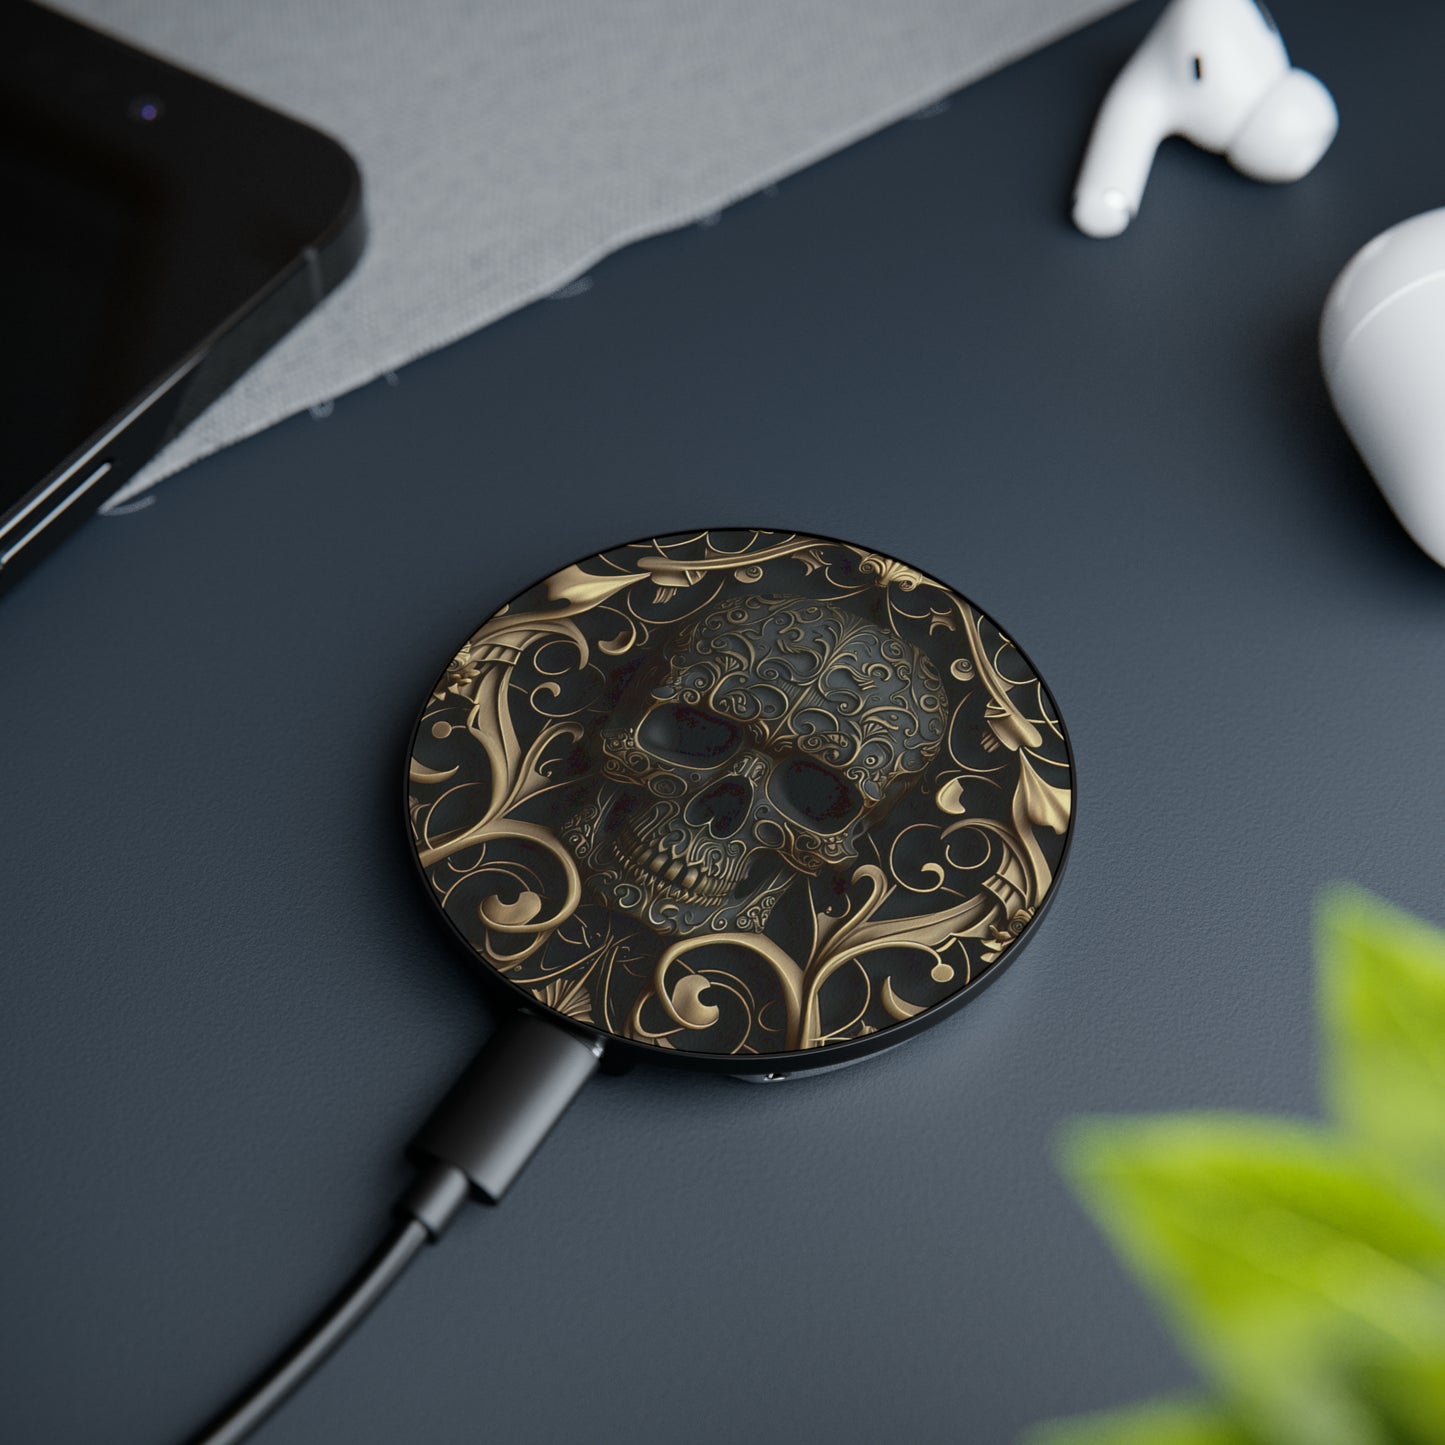 Metallic Chrome Skull And Detailed Background Style 3 Magnetic Induction Charger